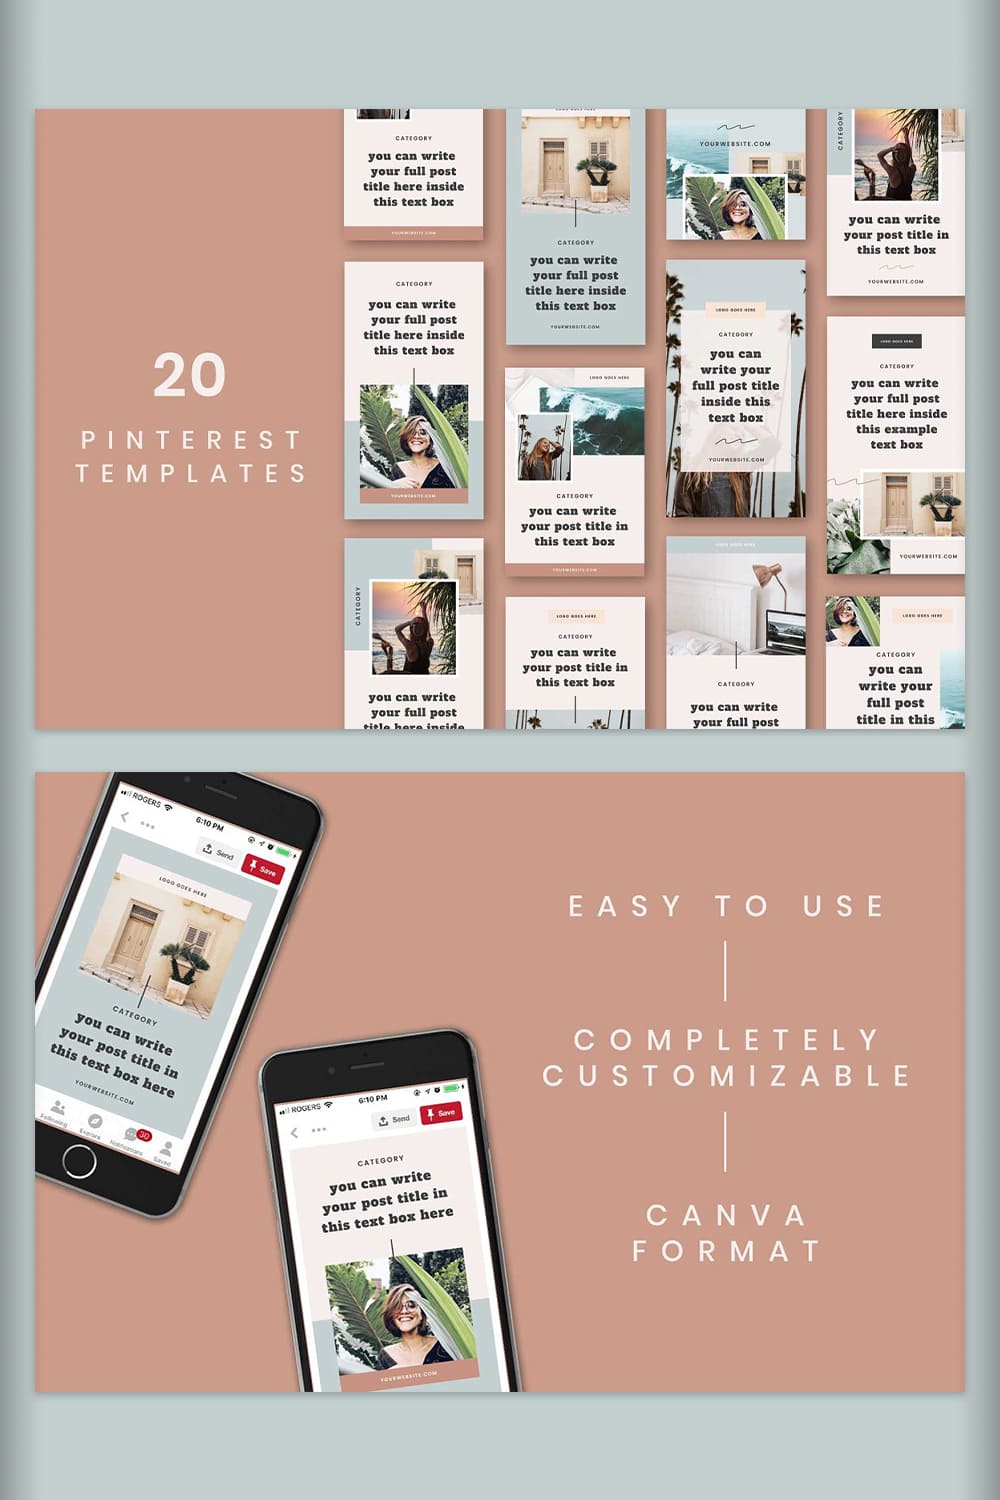 Minnie - 20 Pinterest Templates - "Easy To Usem Completely Customizable".